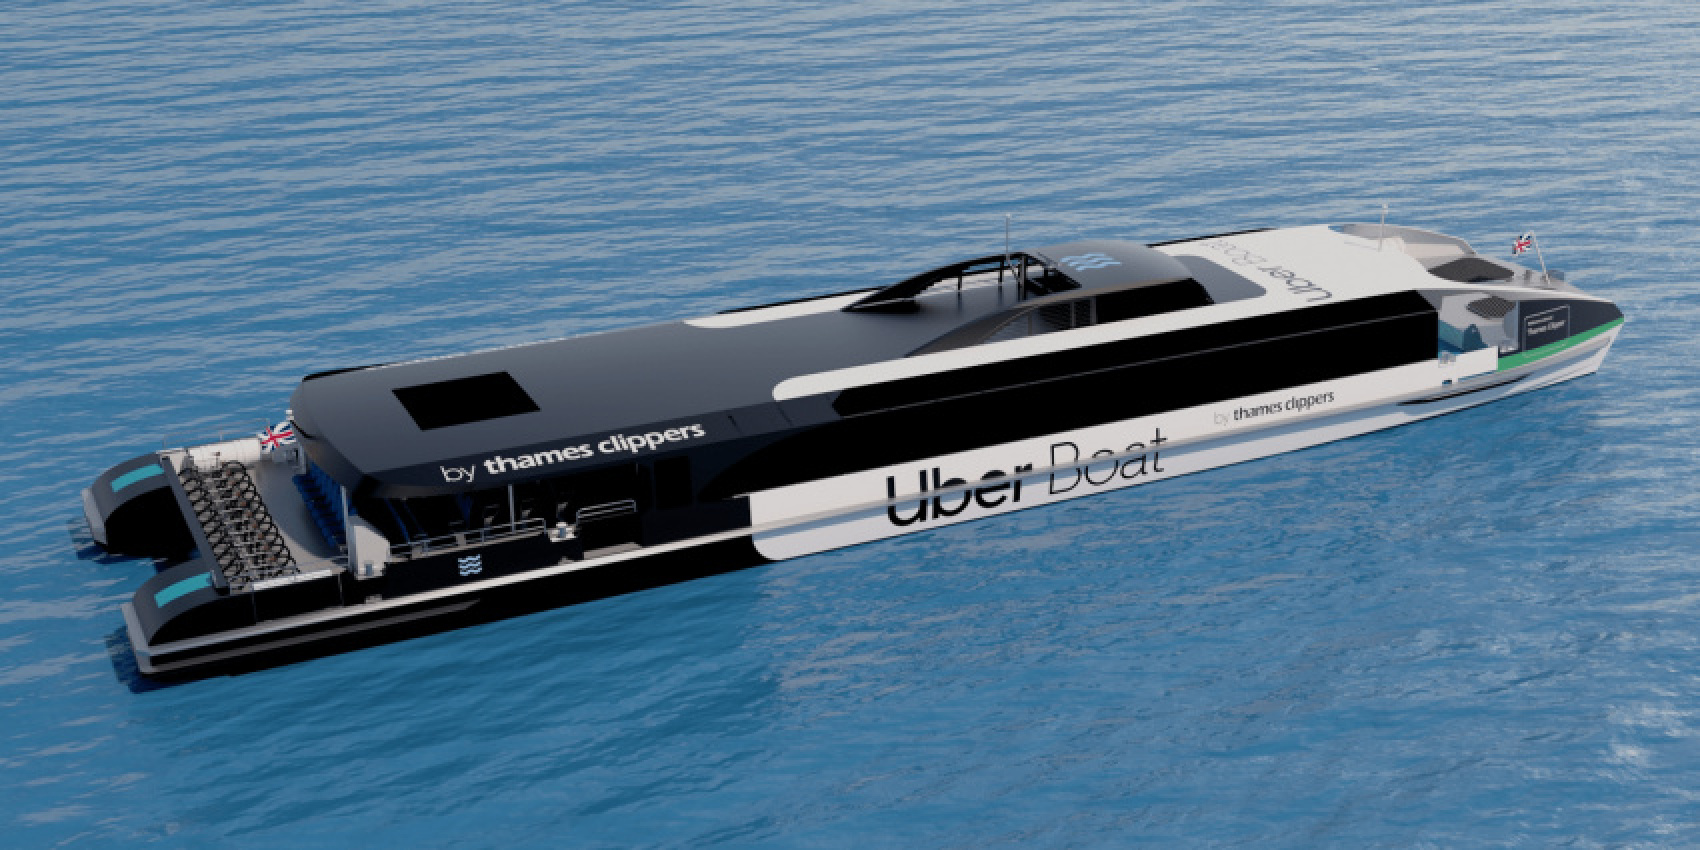 autos, cars, electric vehicle, water, electric ferries, electric ships, london, public transport, thames cloppers, uber boat, thames clippers to introduce hybrid ferries in london